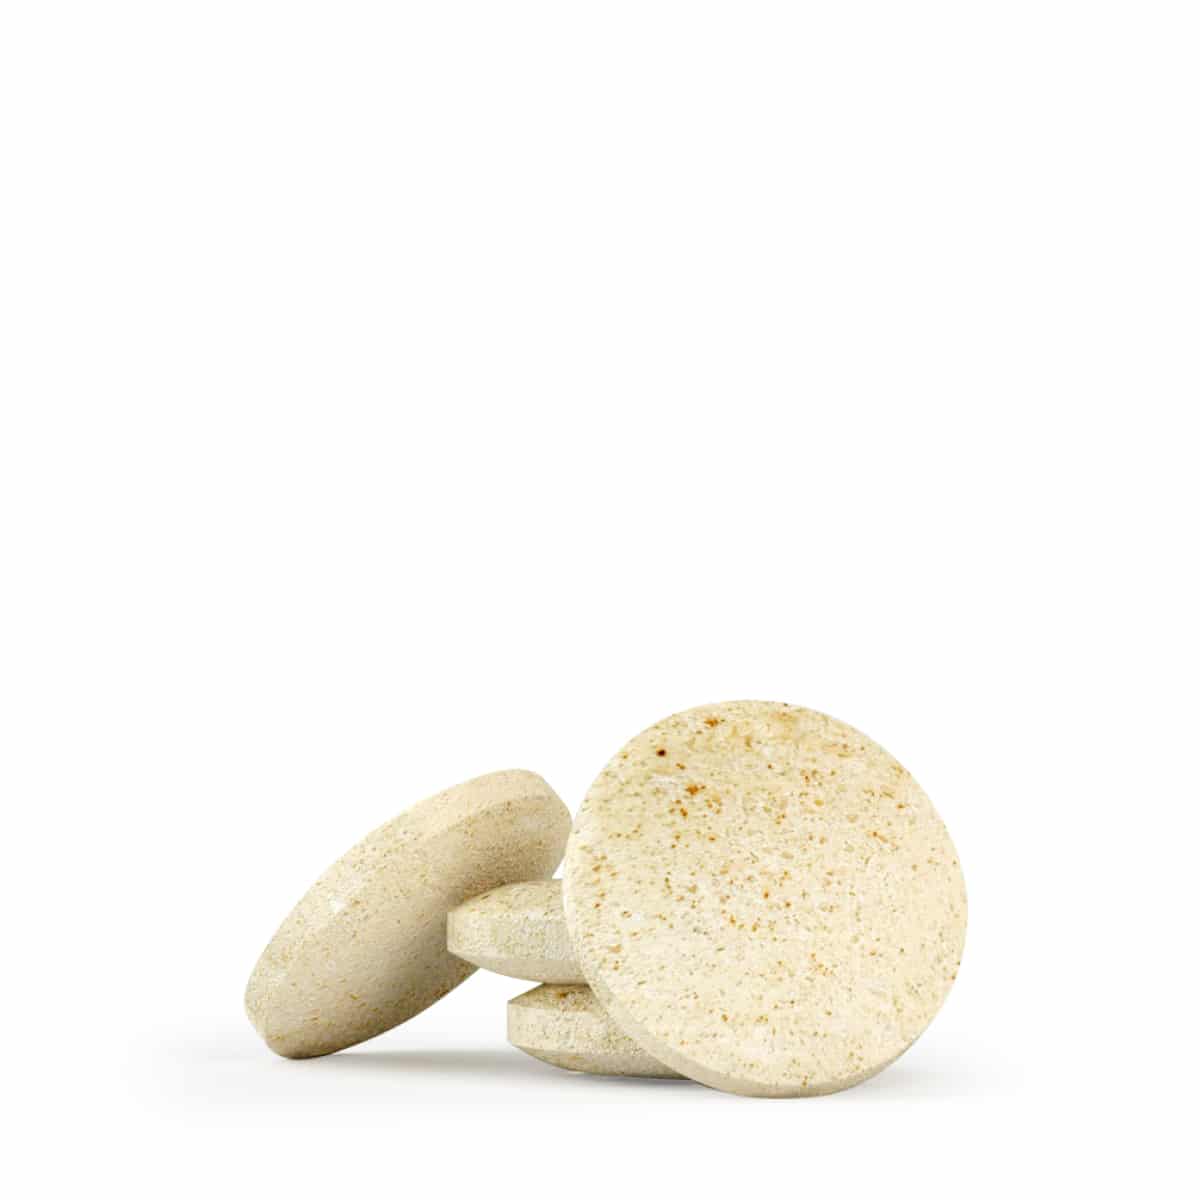 a close up of two CBD pastilles for dogs (3,2mg) on a white background.